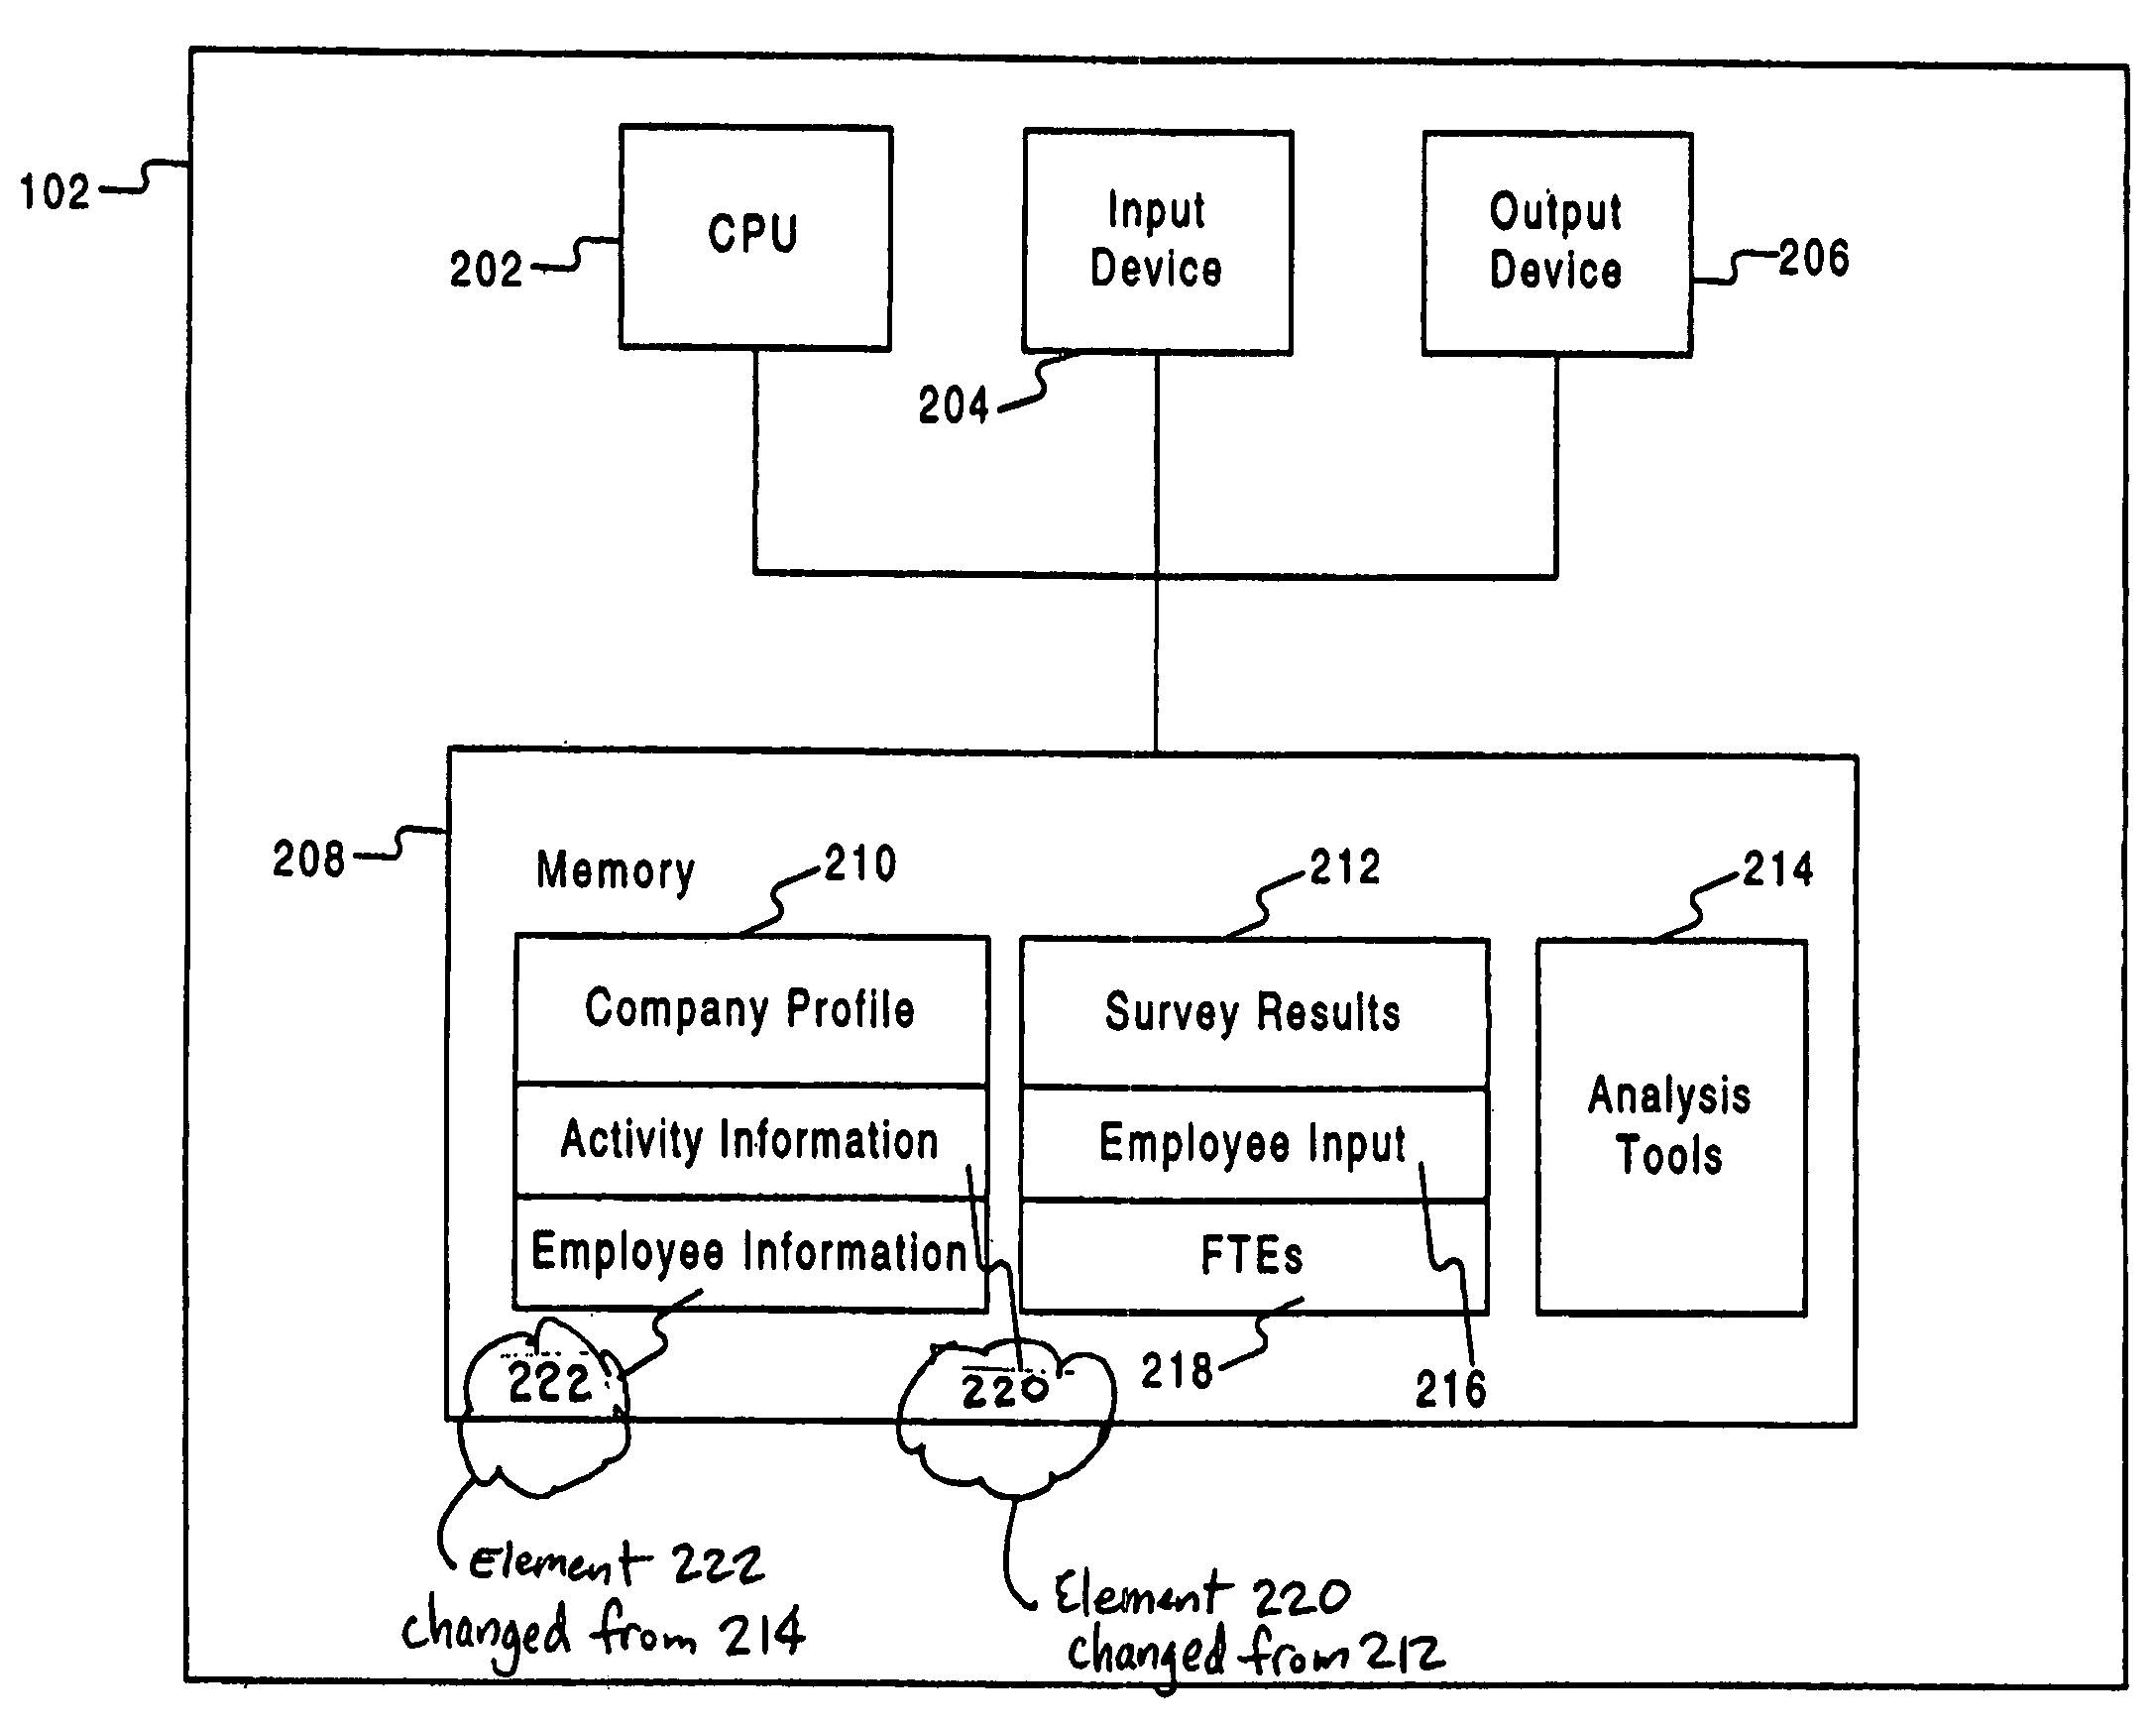 Method for evaluating activity-based costs of a company